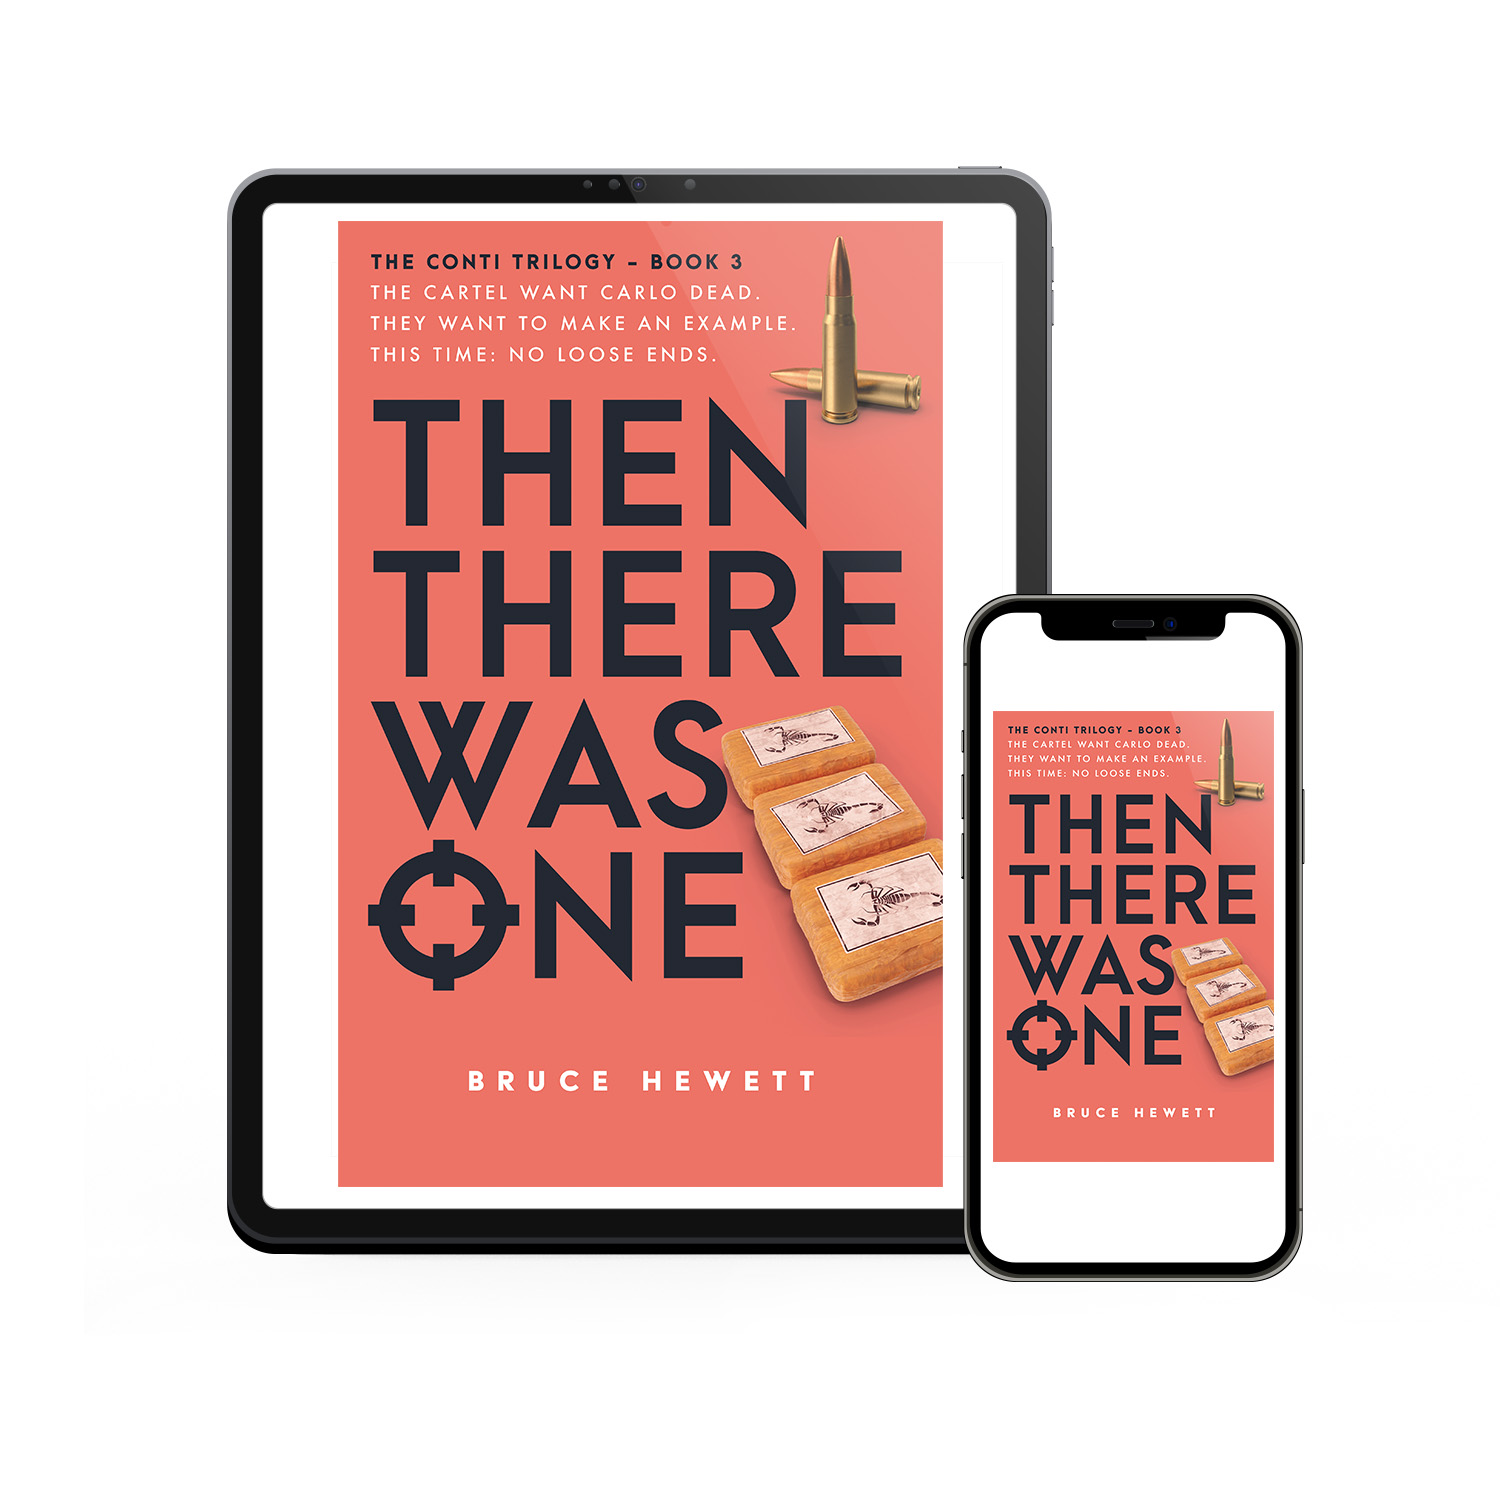 'Then There Was One' is the final instalment in an Australia-set, pharmacrime thriller series, The Conti Trilogy. The author is Bruce Hewett. The book cover and interior formatting are designed by Mark Thomas of coverness.com. To find out more about my book design services, please visit www.coverness.com